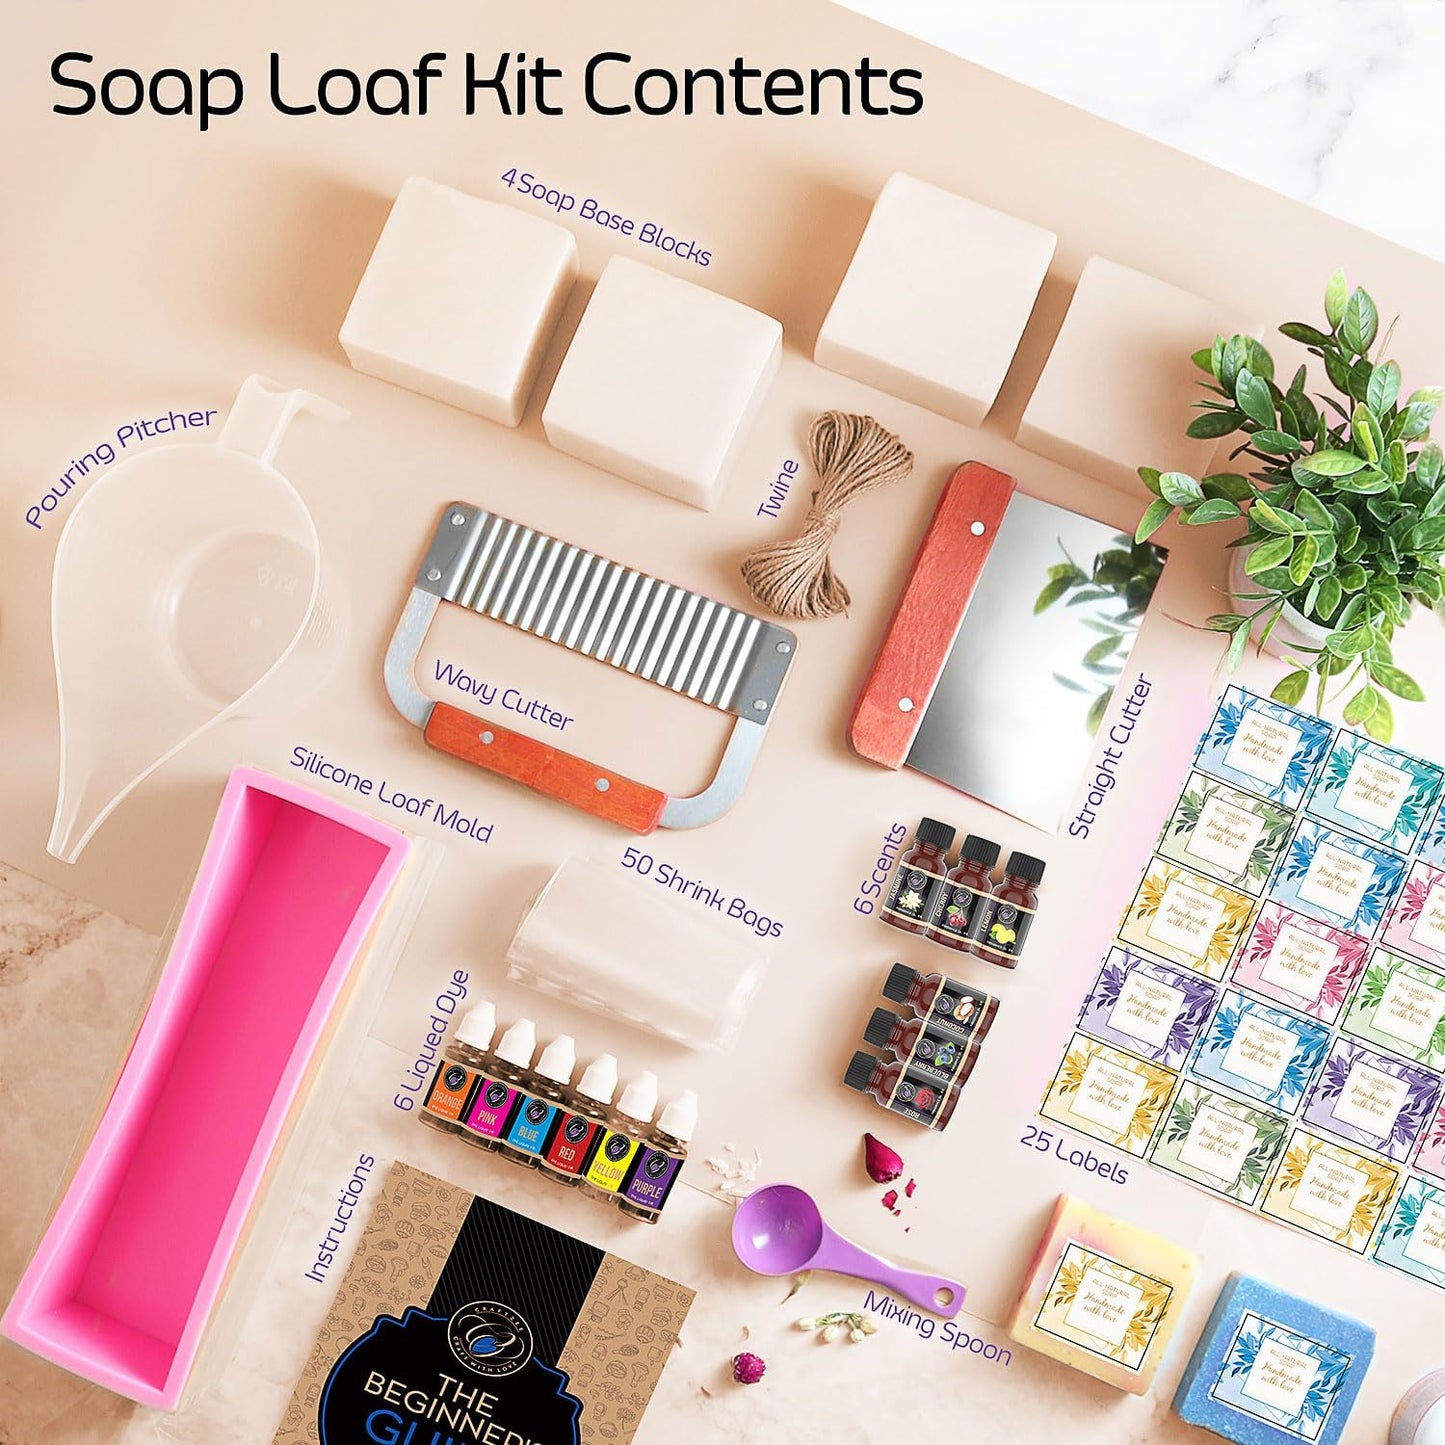 Soap Making Kit for Adults and Kids - Soap Making Supplies with Shea Butter Soap Base, Silicone Loaf Molds, Cutters, Fragrances & More Melt and Pour Soap DIY Craft Kits